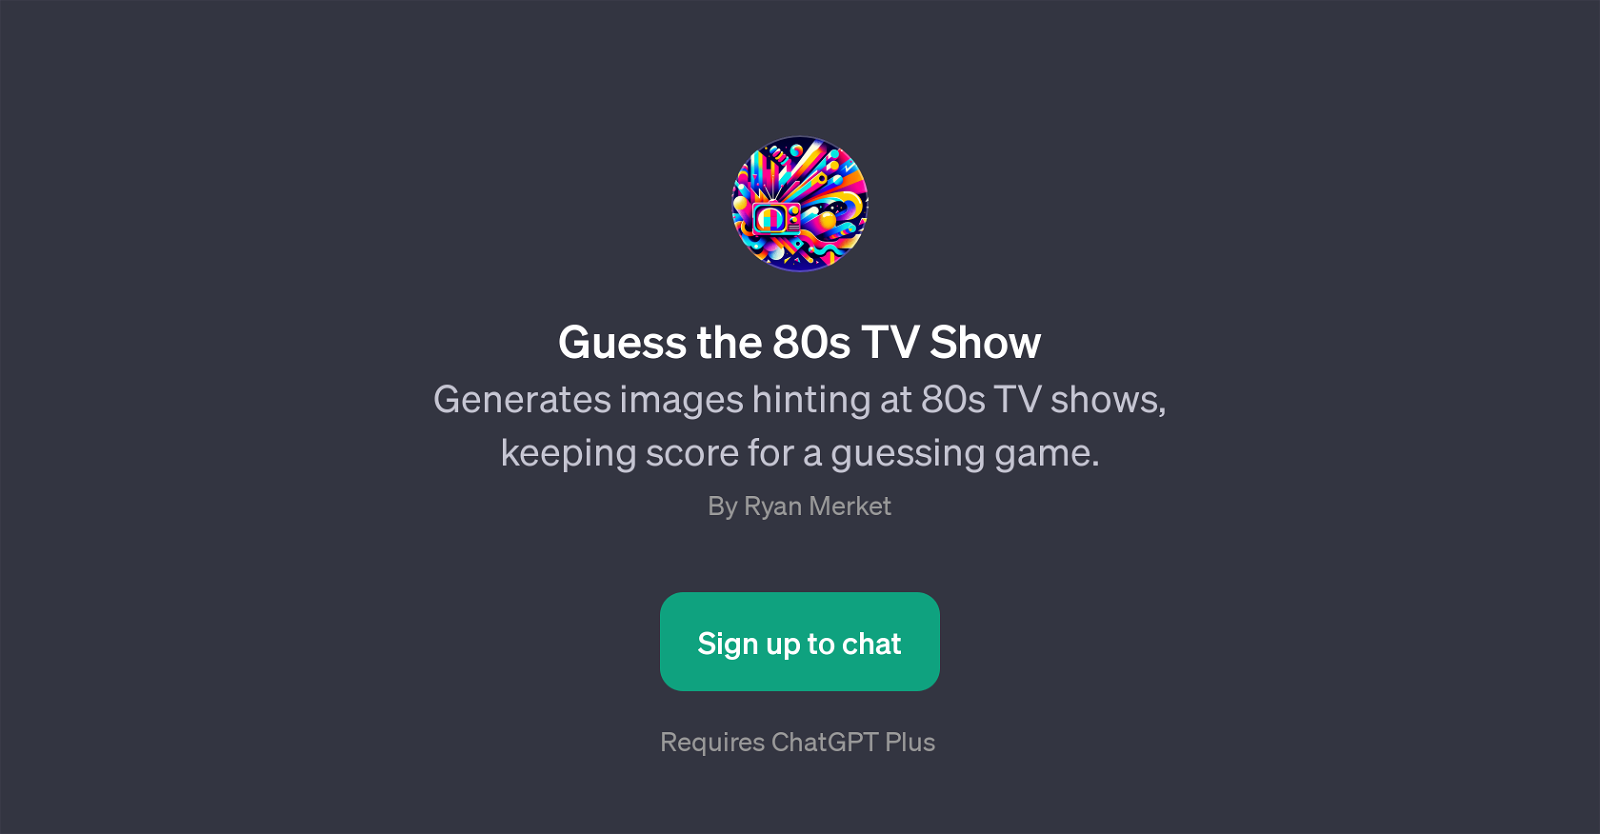 Guess the 80s TV Show website